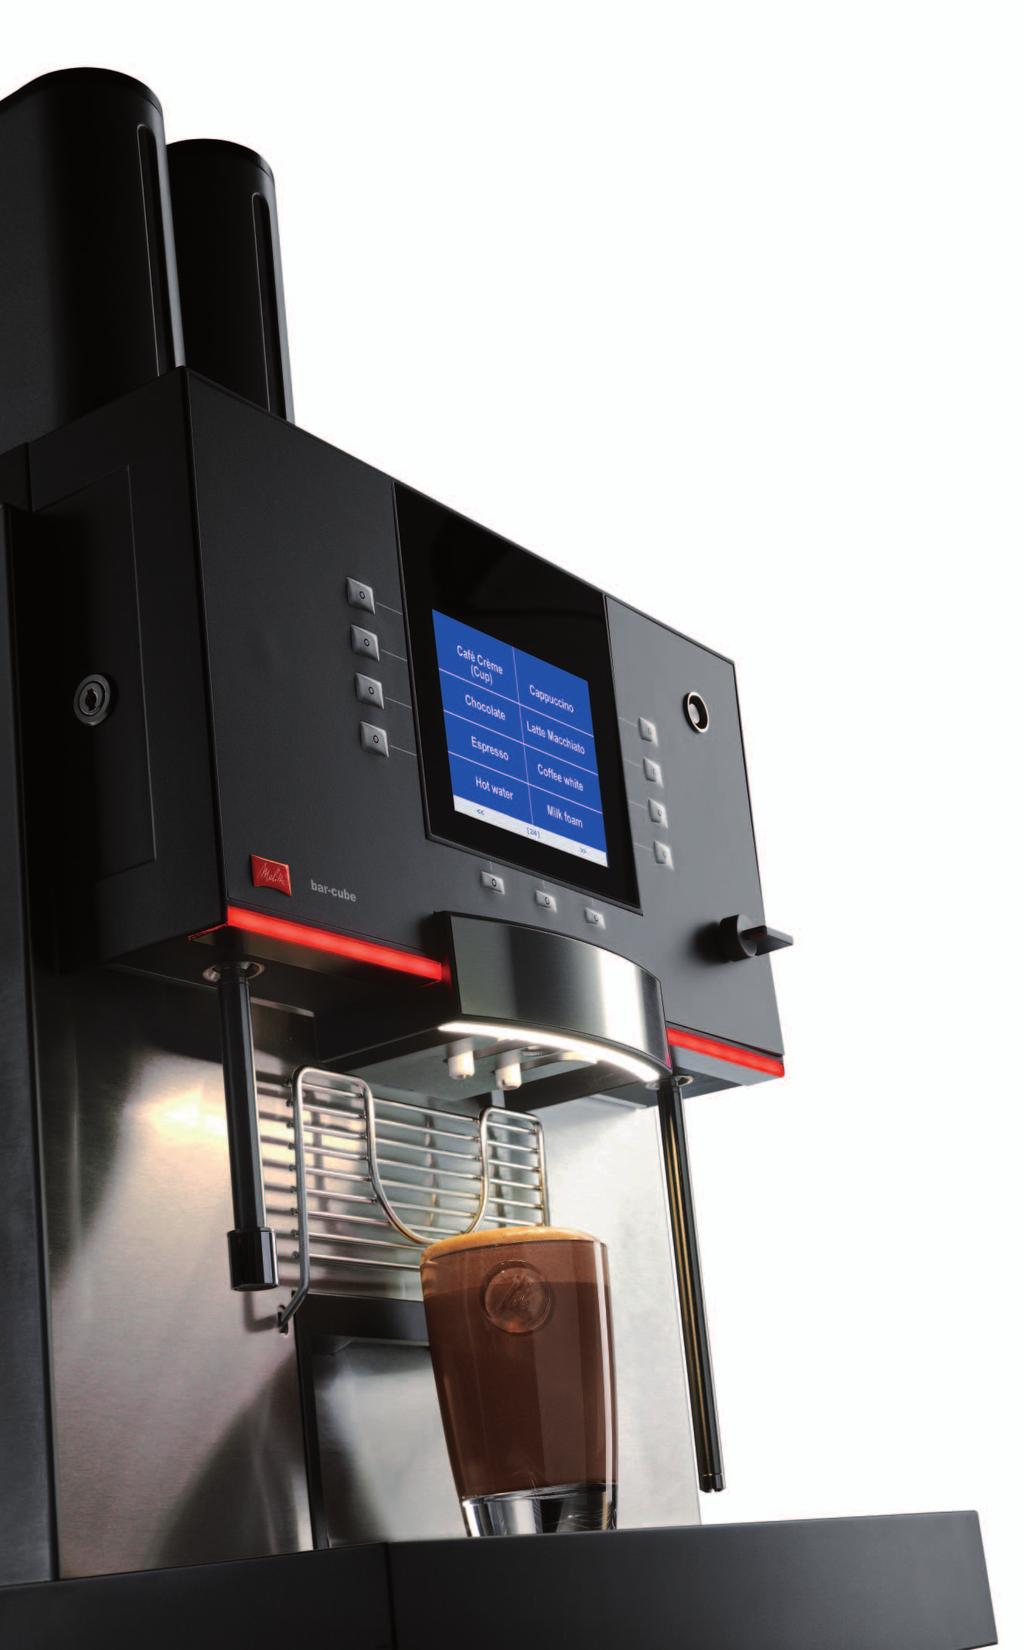 time. Diverse, varied, and fully automatic - the Melitta bar-cube will prepare all kinds of